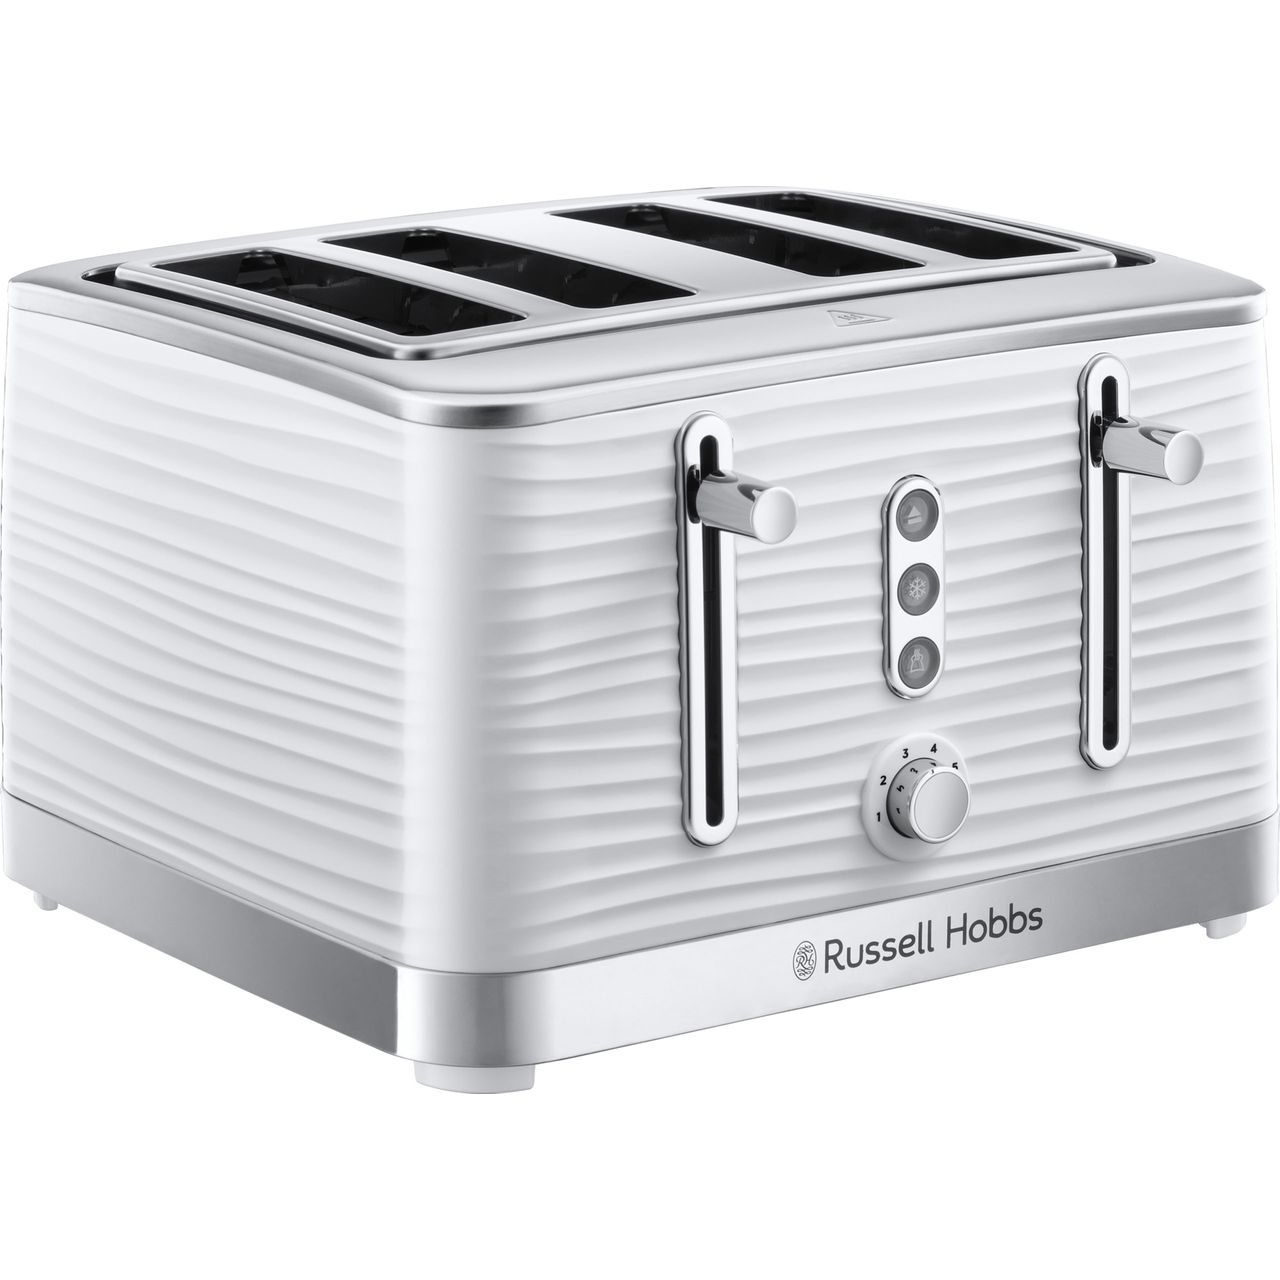 Russell Hobbs Inspire 24380 4 Slice Toaster Review